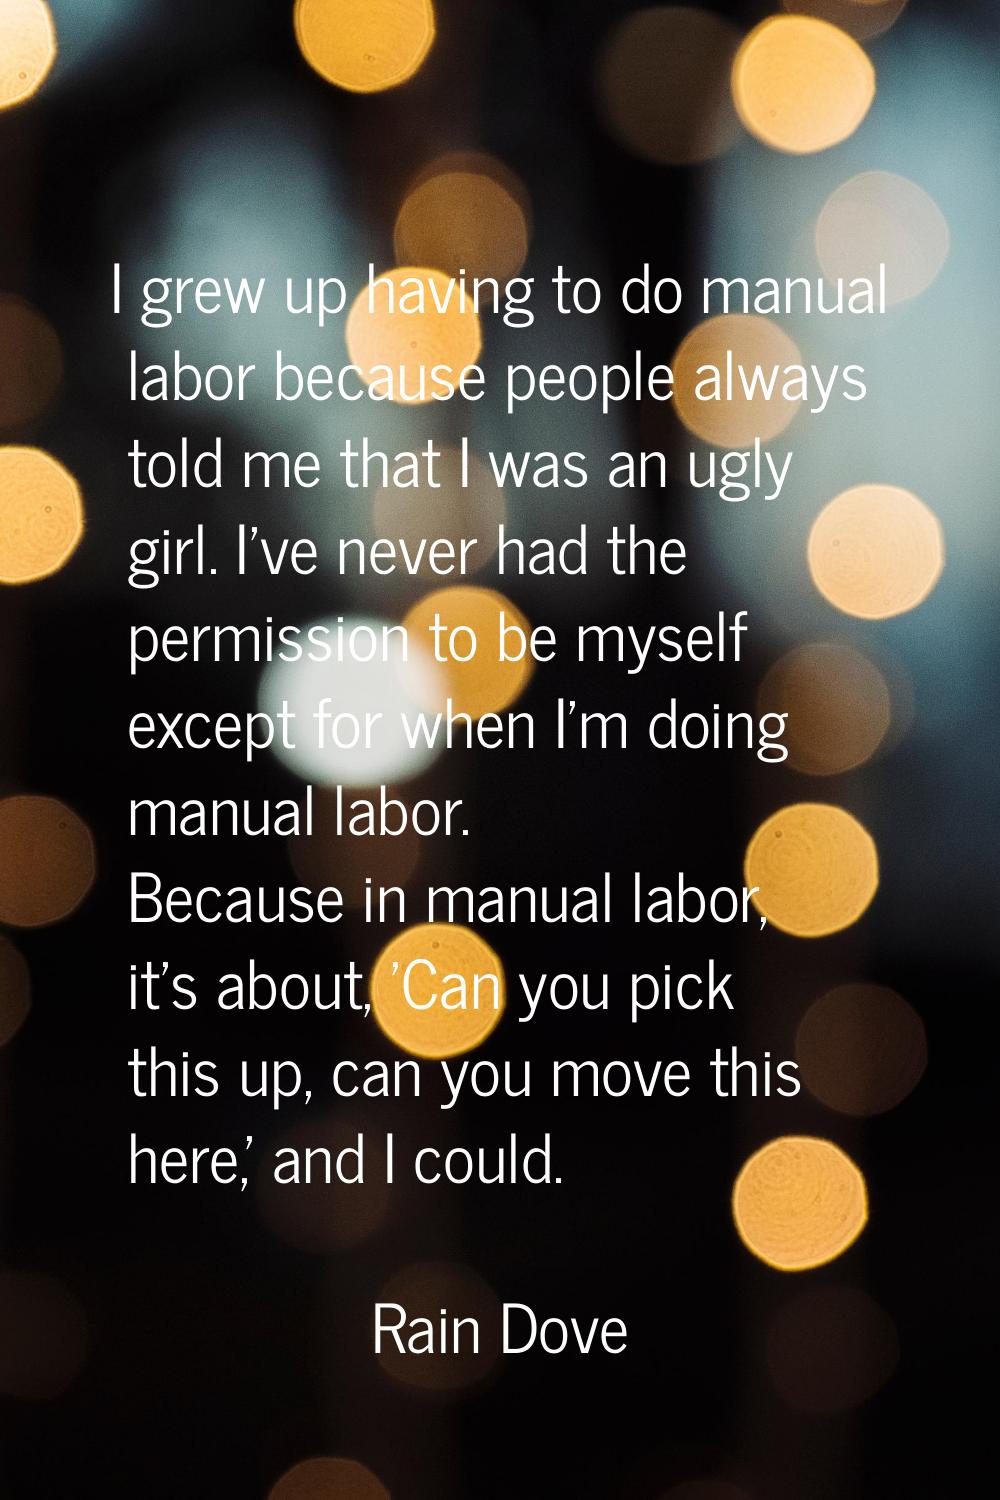 I grew up having to do manual labor because people always told me that I was an ugly girl. I've nev